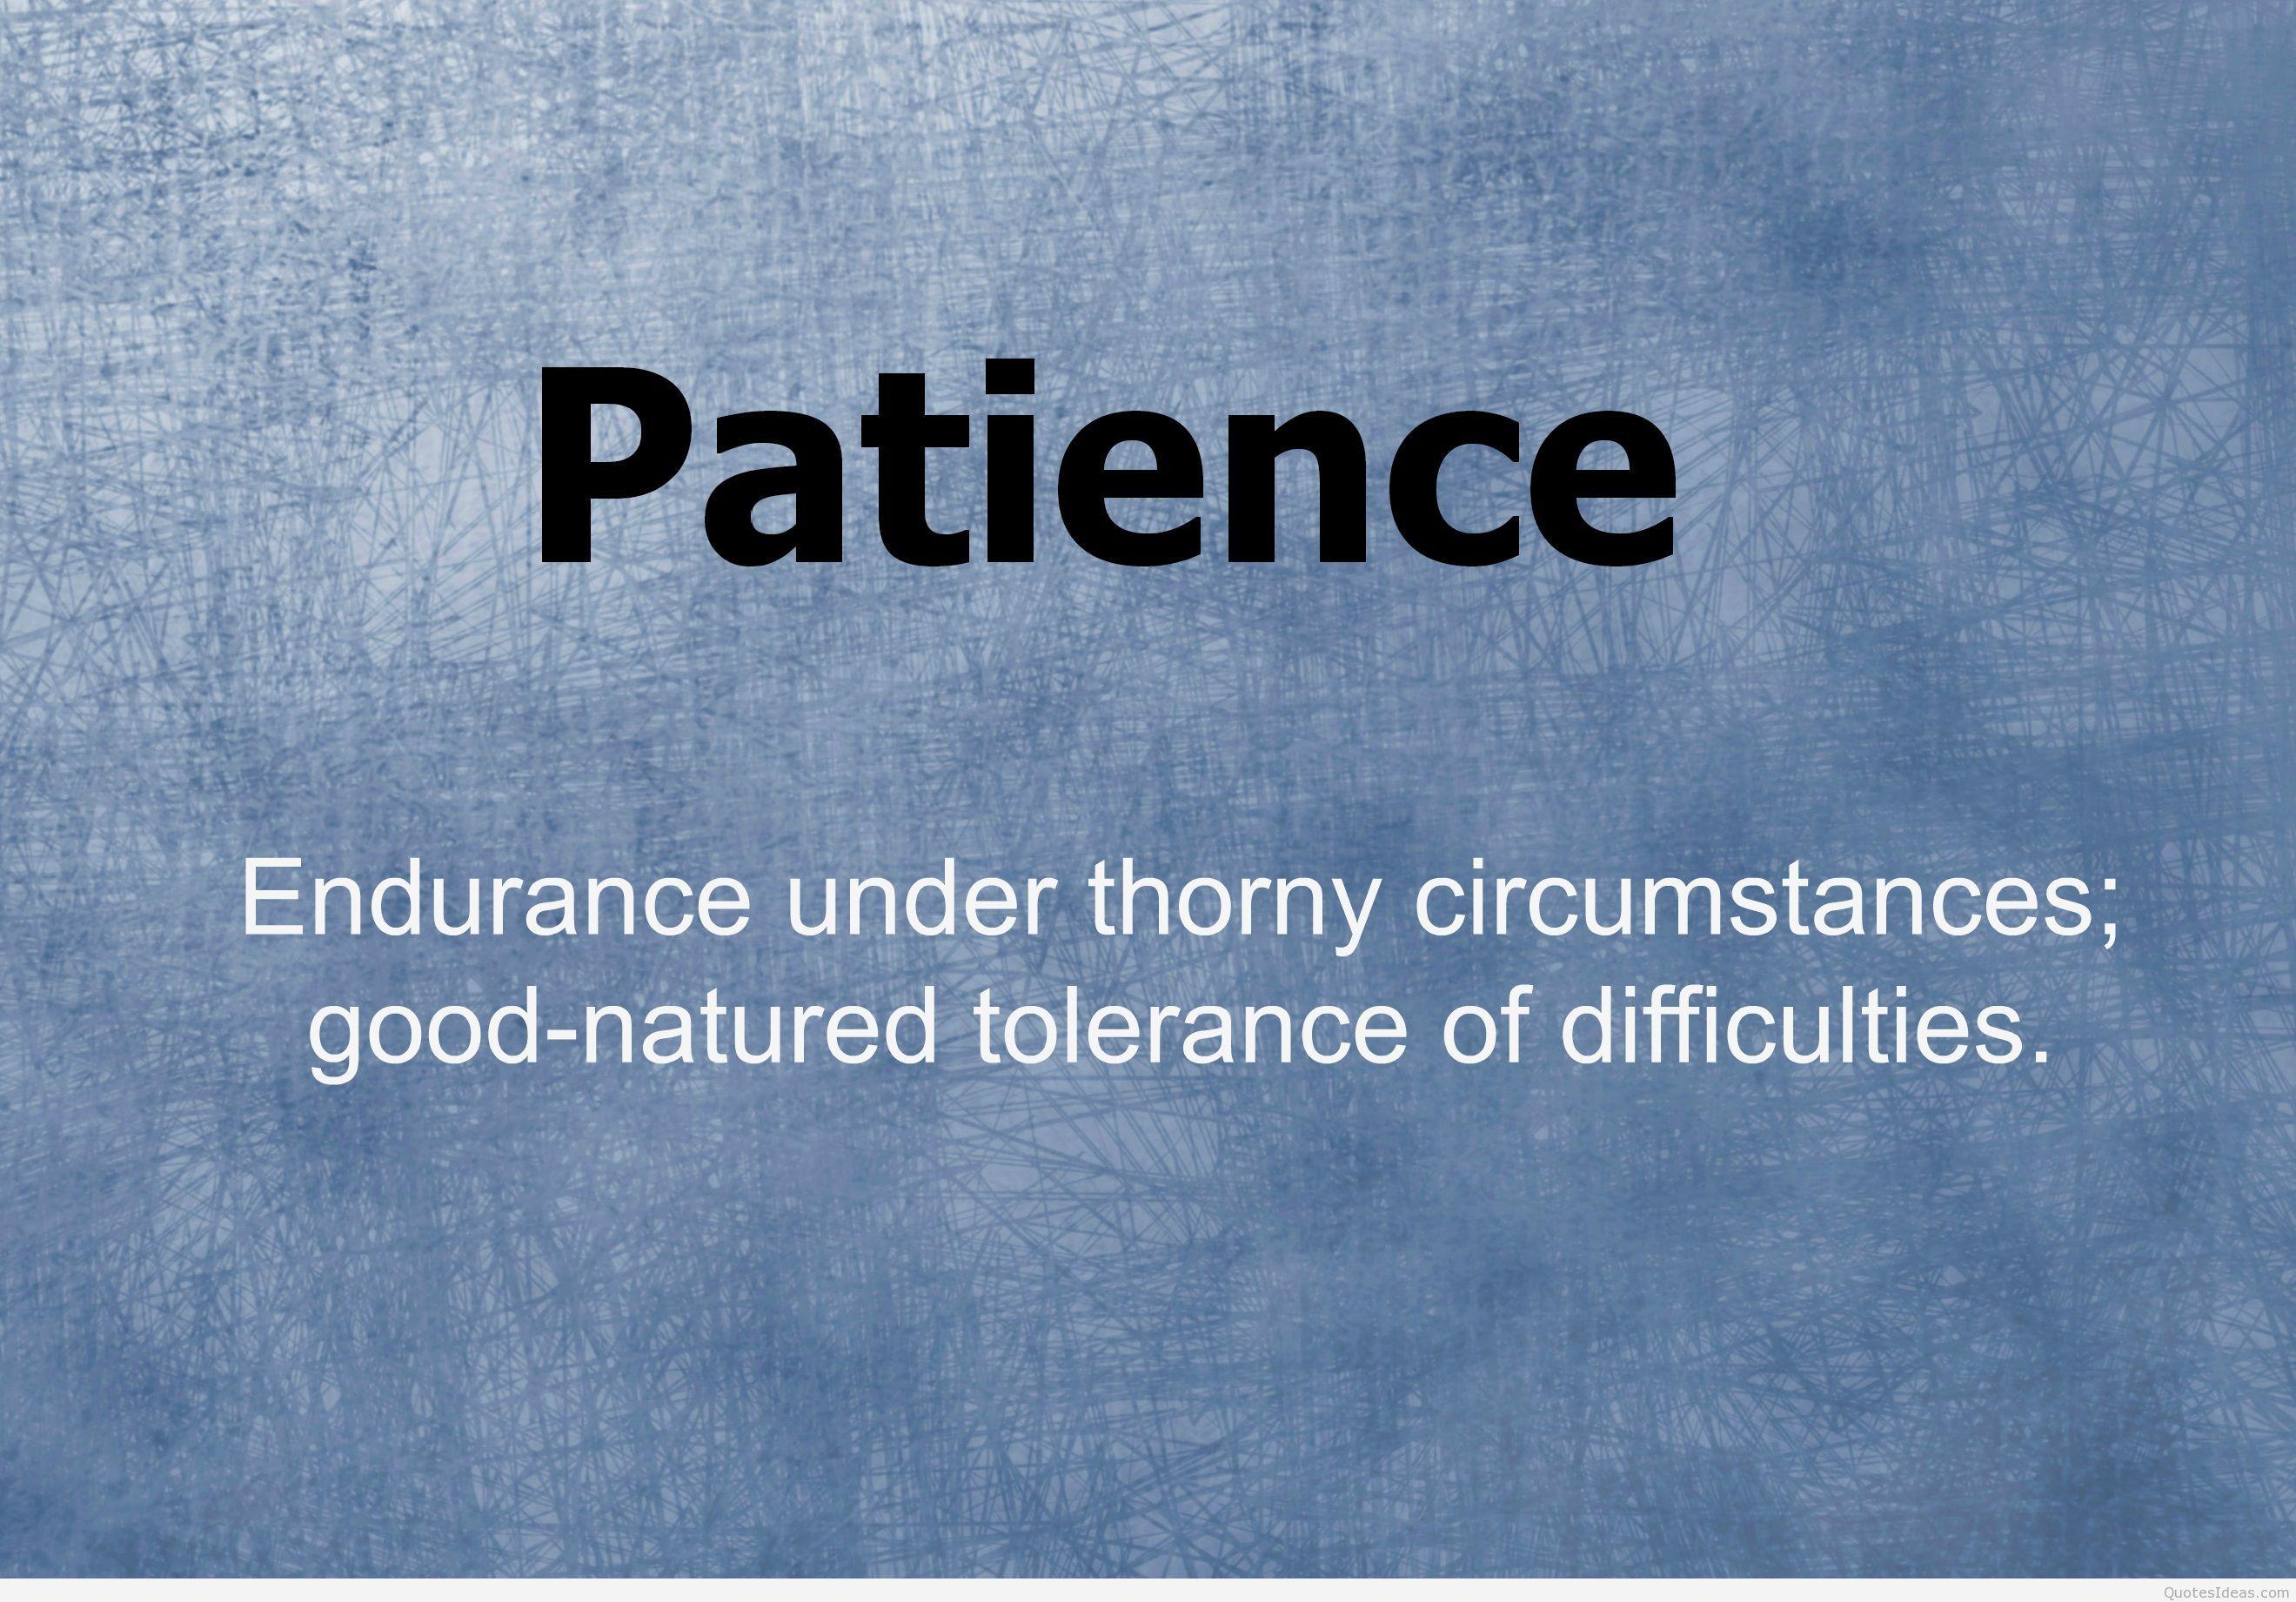 Patience quotes with image hd